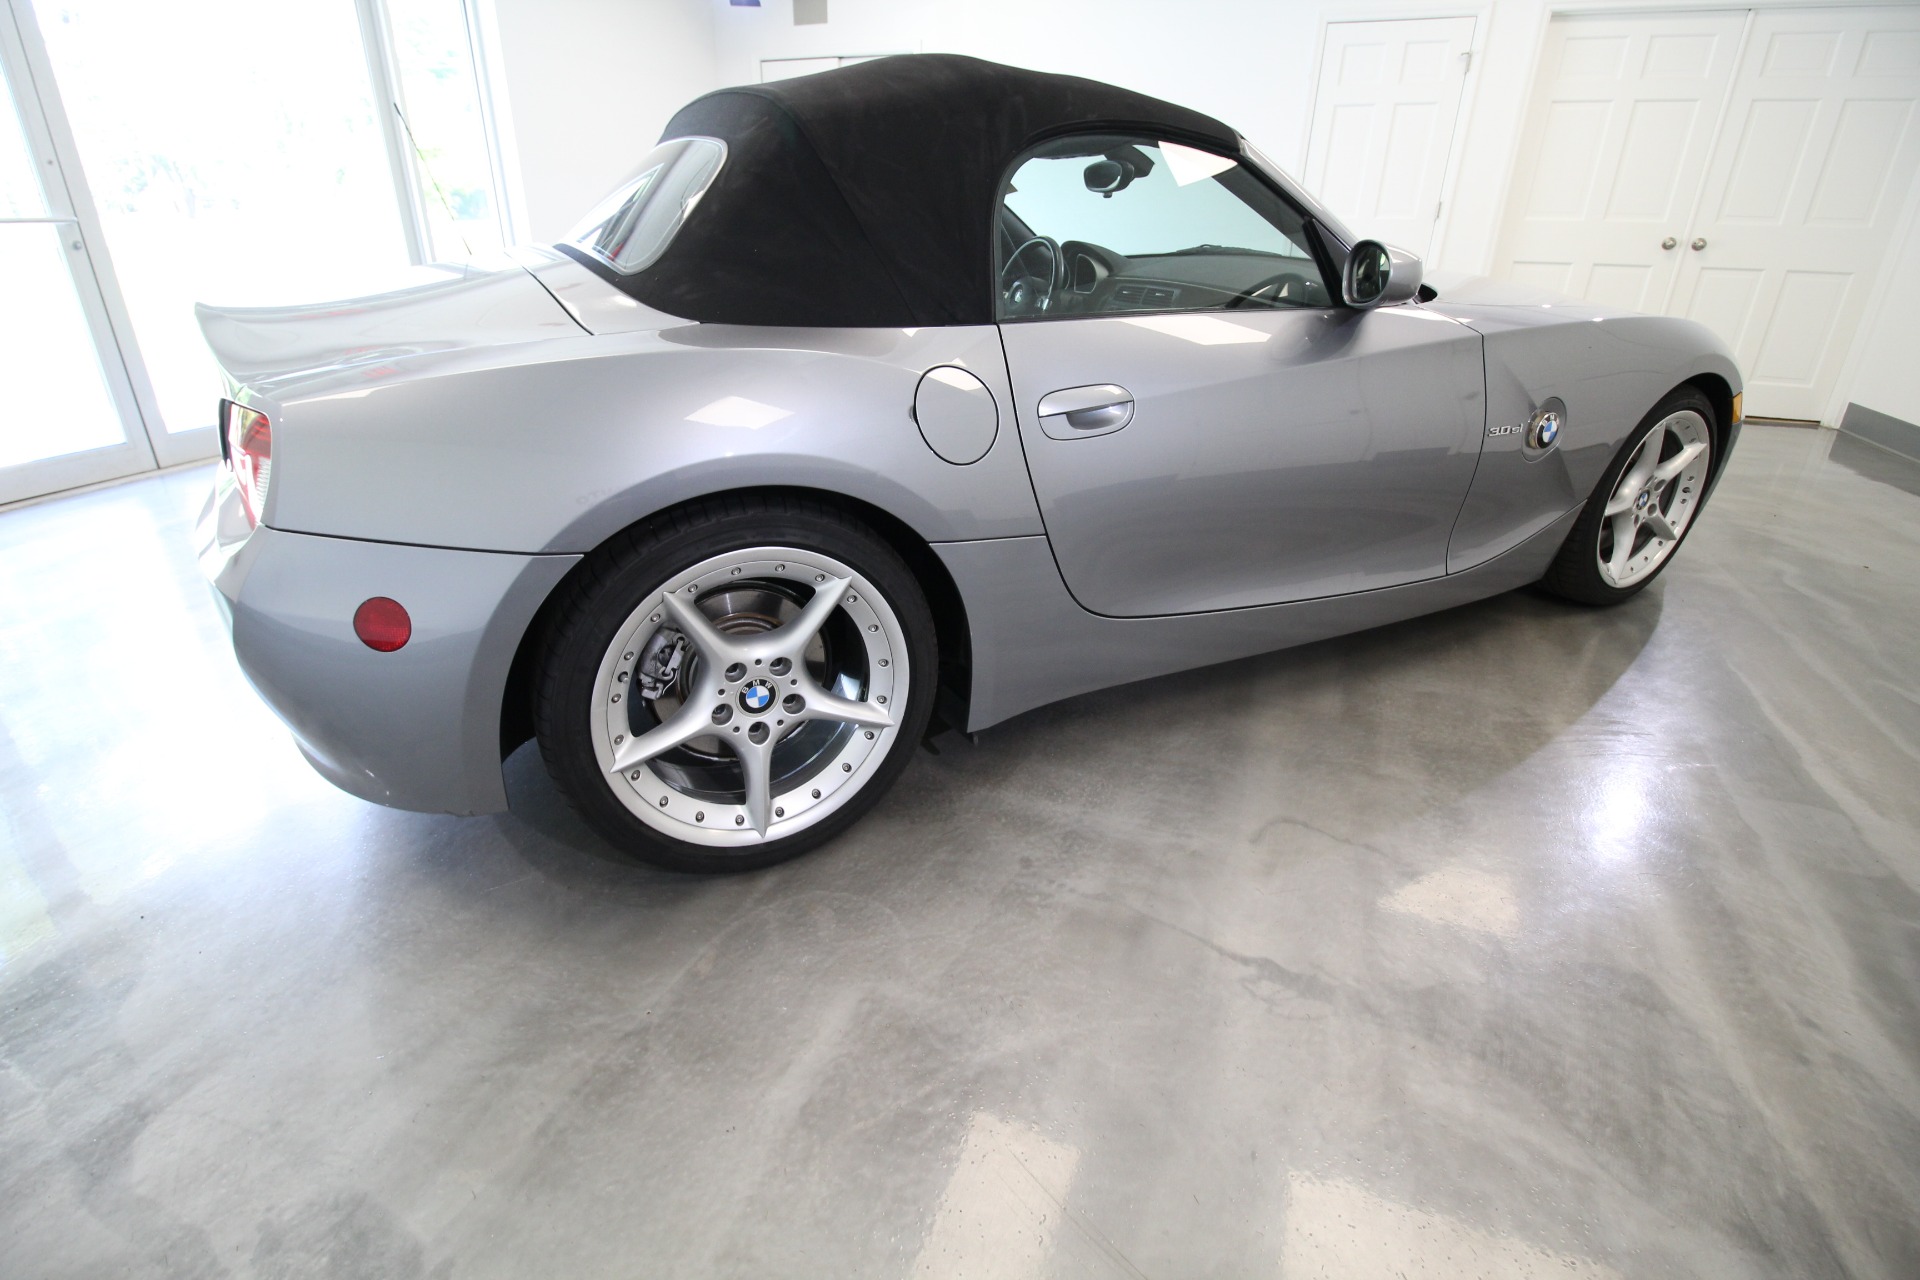 Used 2007 Silver Gray Metallic with Black Soft Top BMW Z4 Roadster 3.0si LOADED - CLEAN - 1 OWNER | Albany, NY